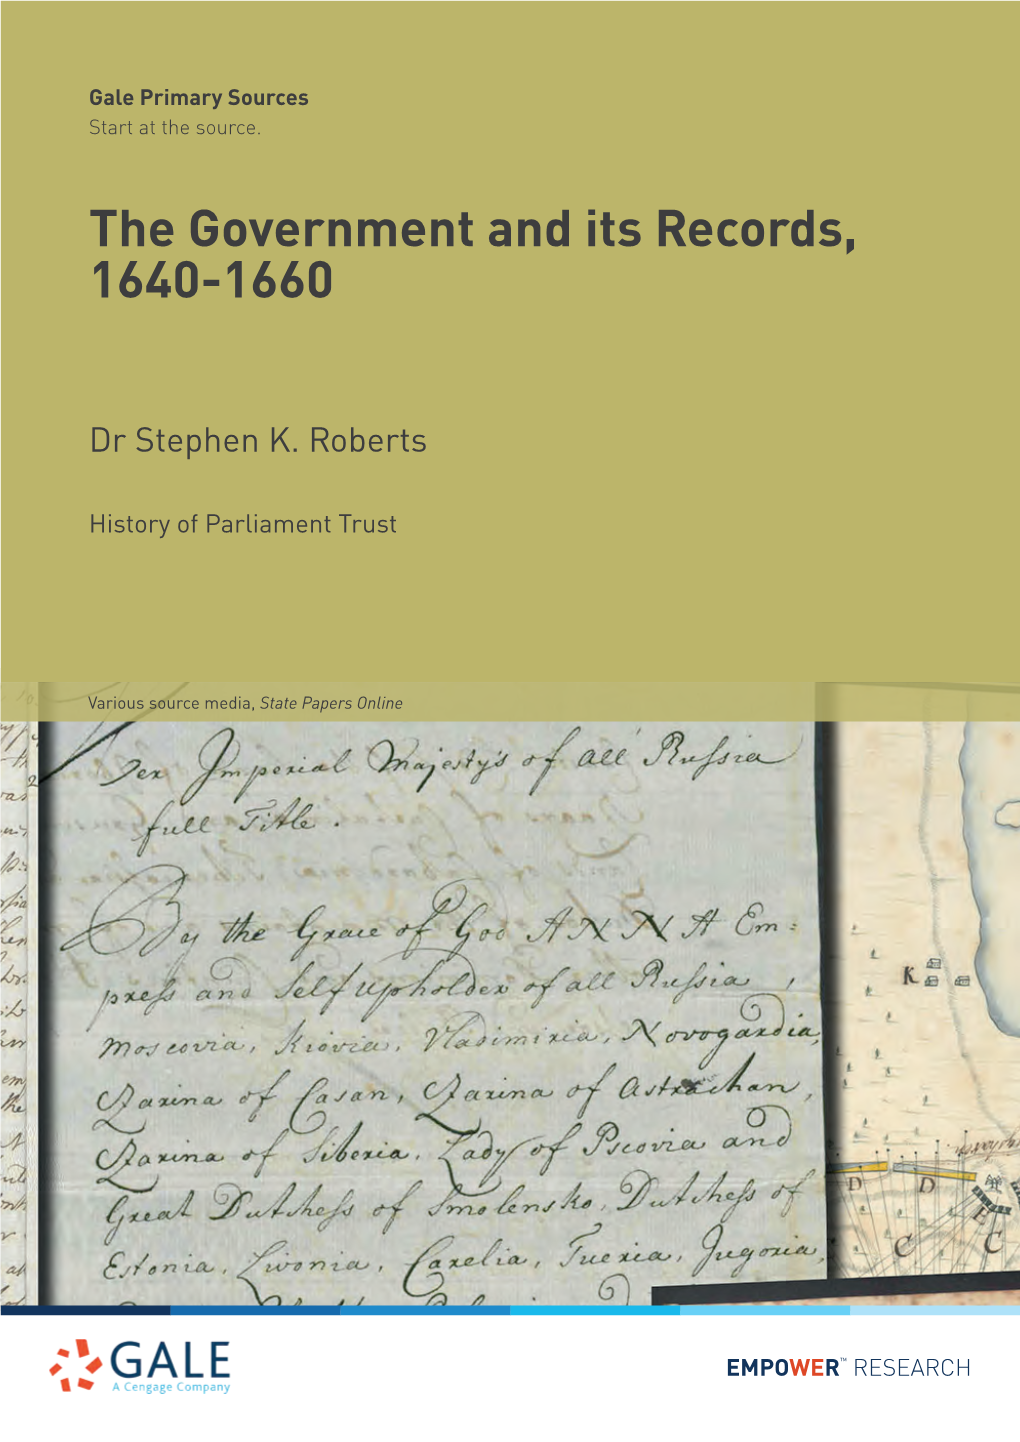 The Government and Its Records, 1640-1660